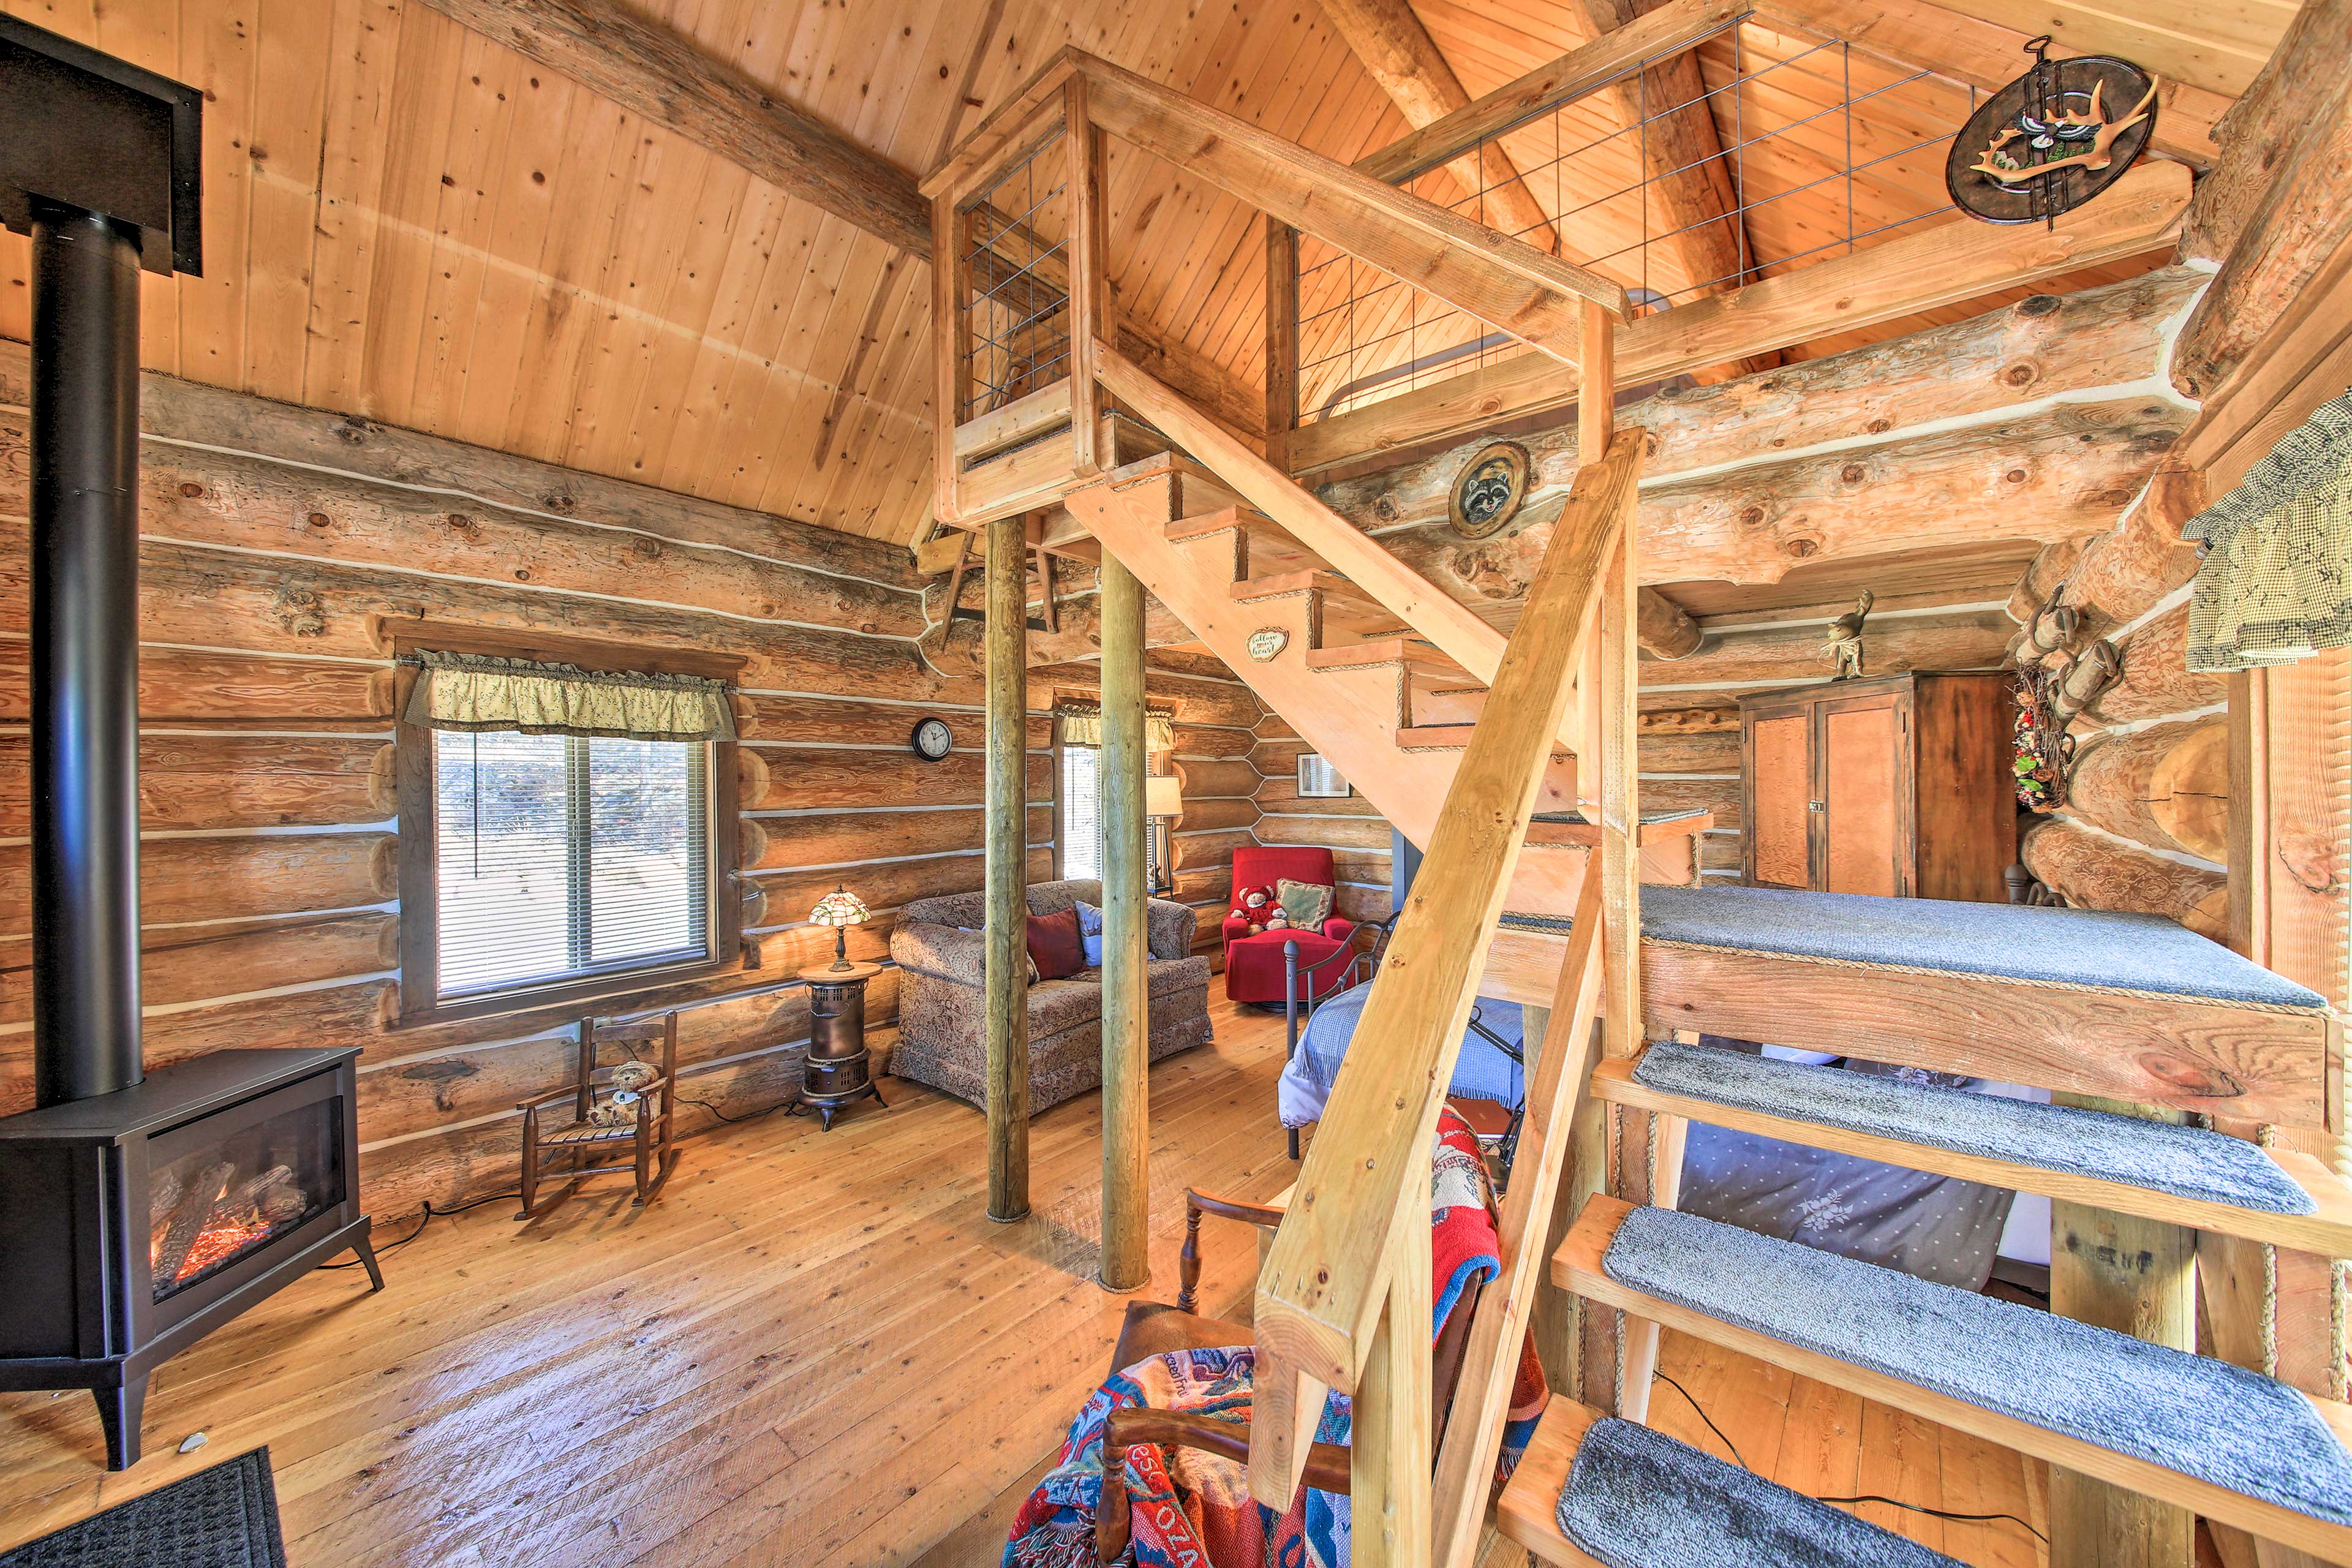 Step inside and enter the log-cabin living space.